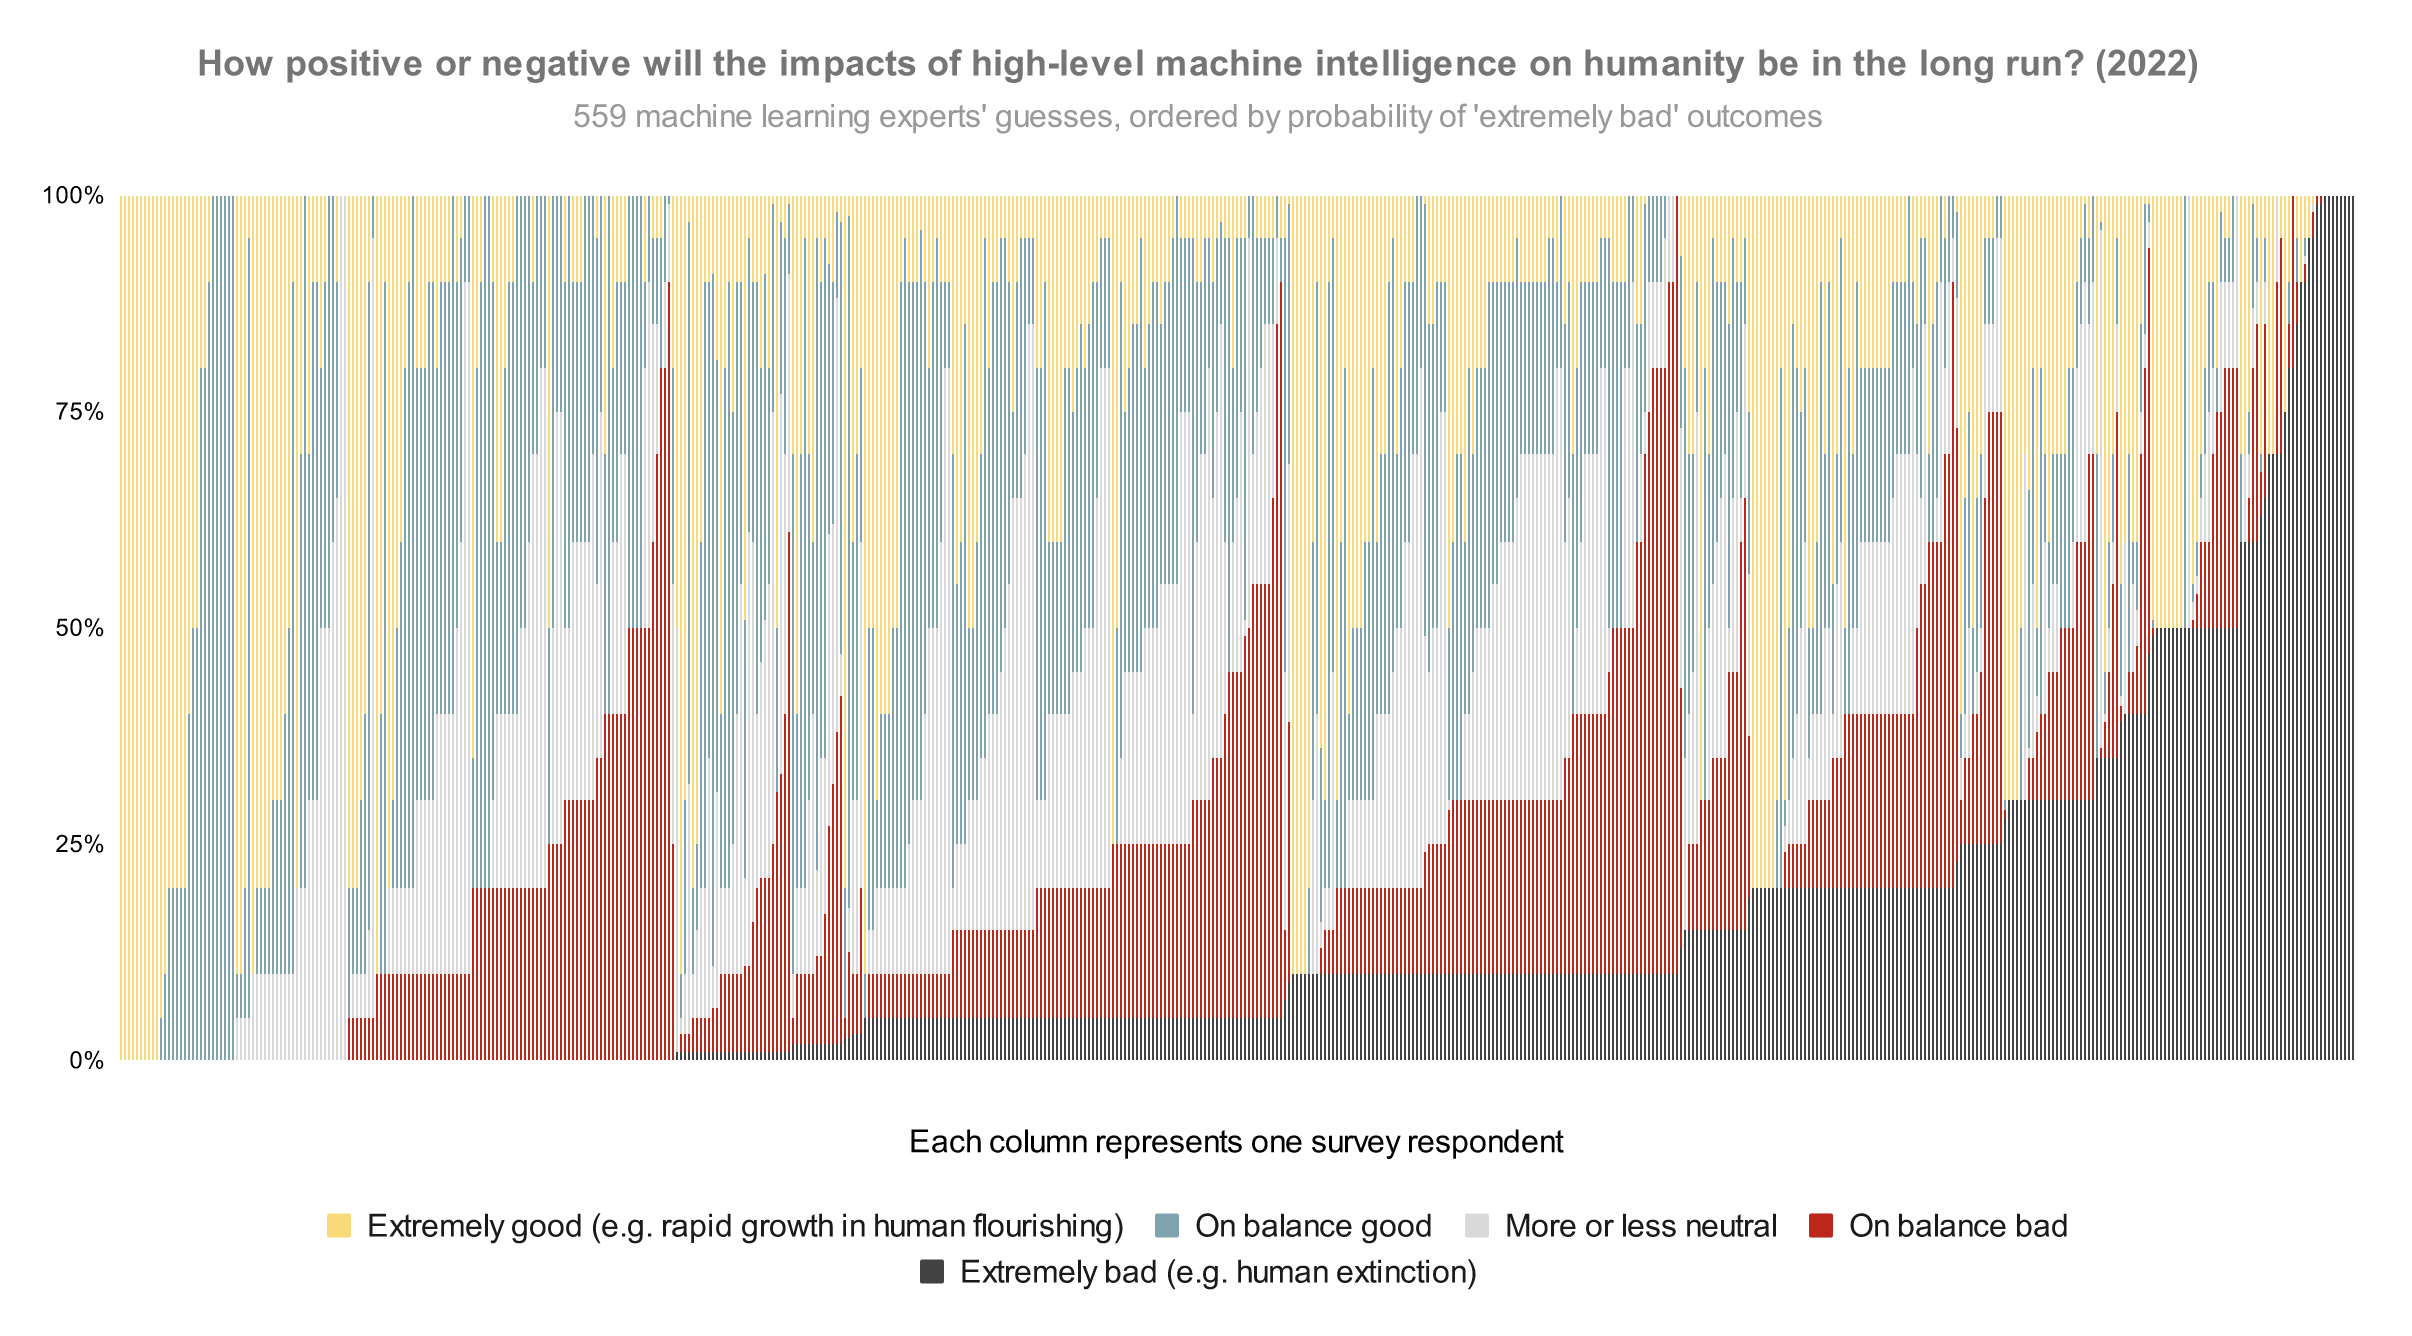 In our survey last year, we asked publishing machine learning researchers how they would divide probability over the future impacts of high-level mach